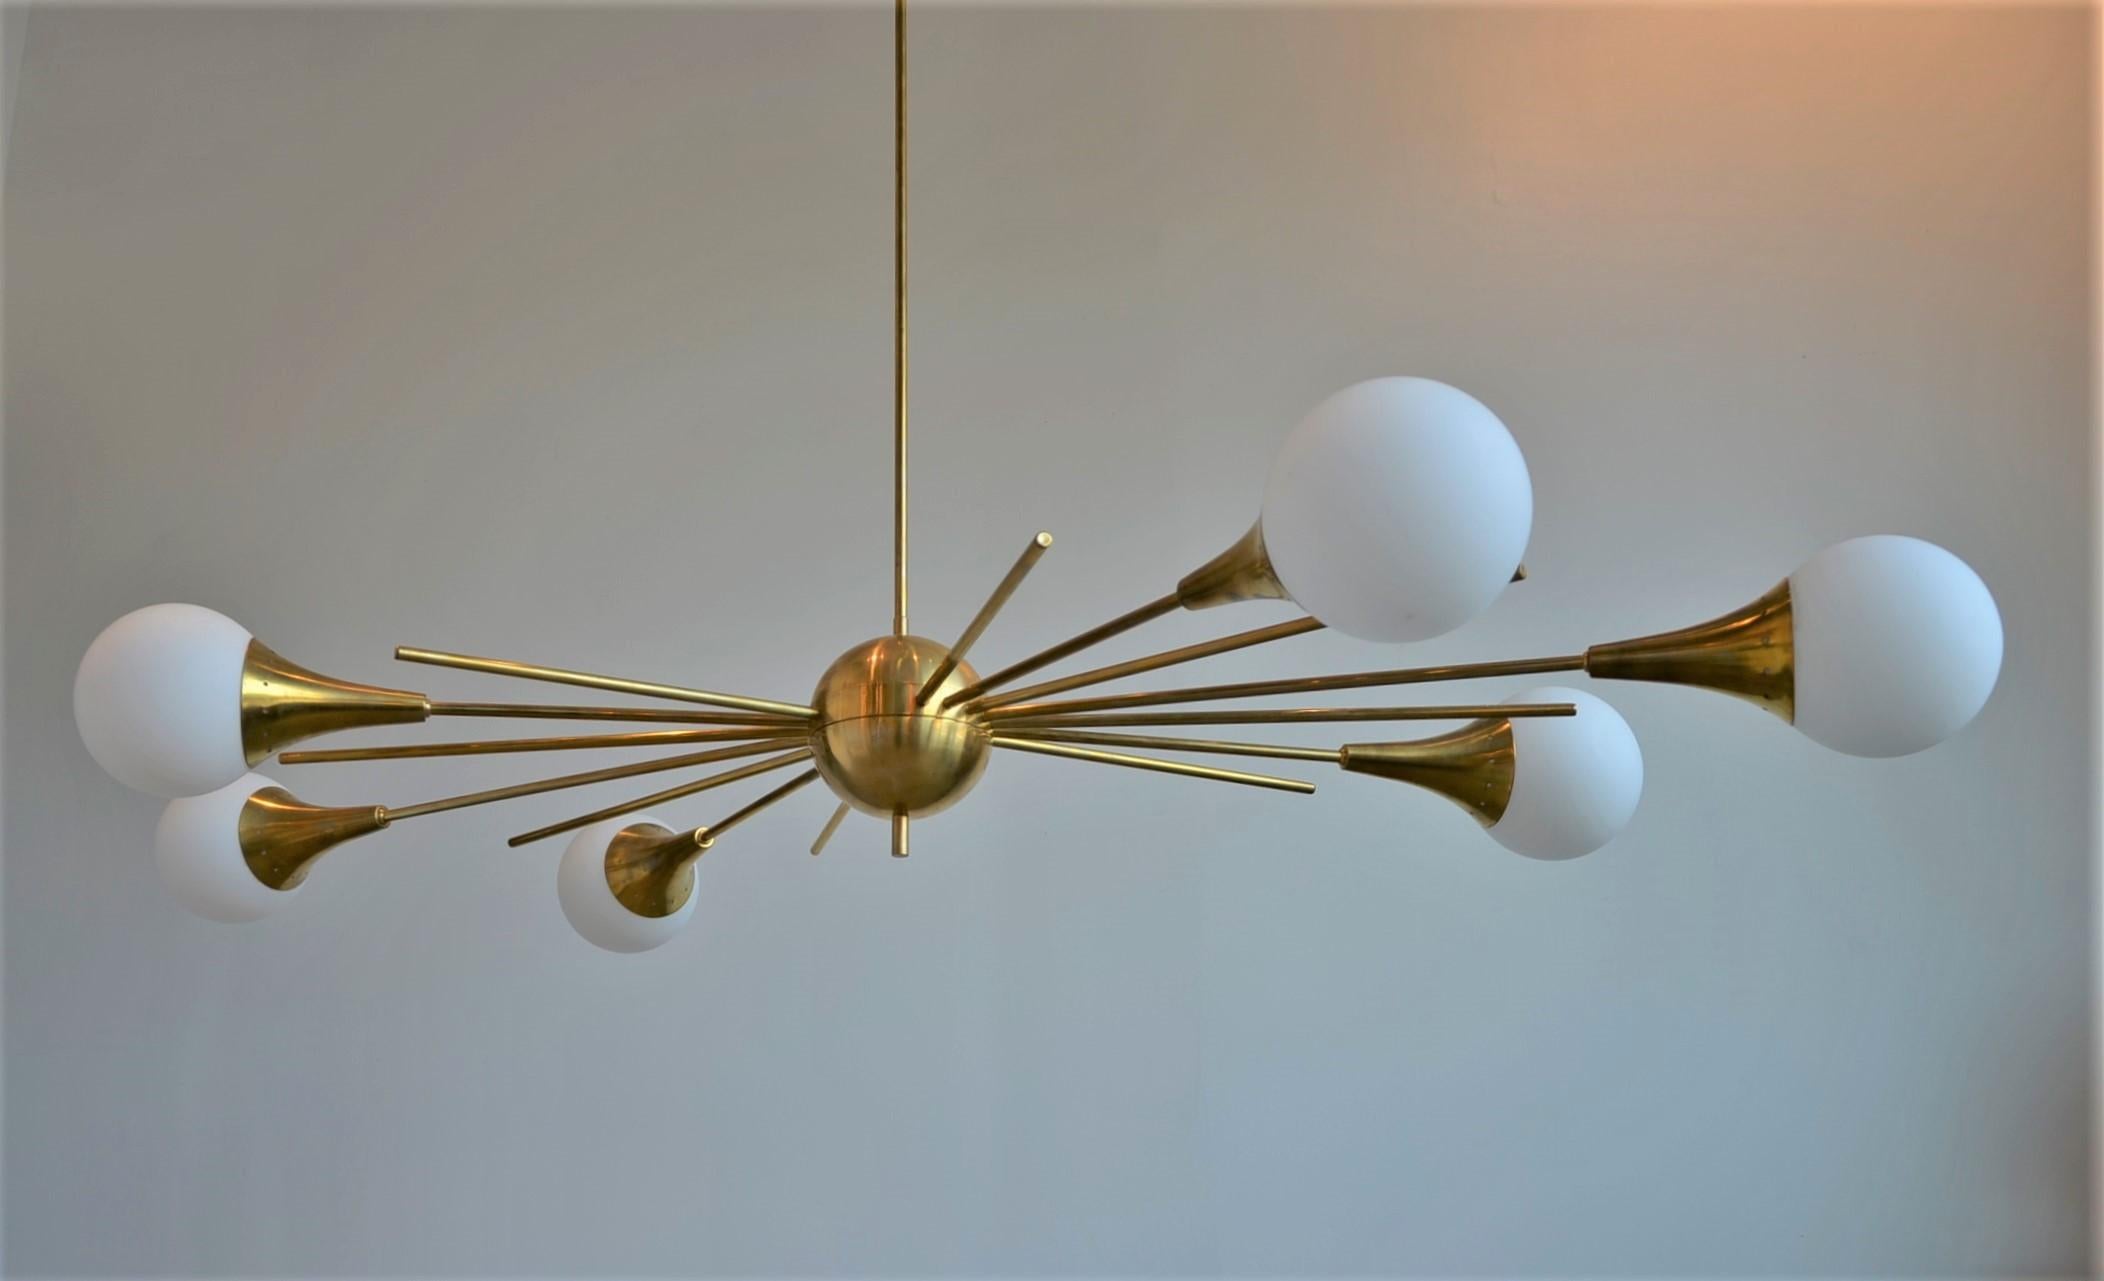 Offered is a Mid-Century Modern Italian Stilnovo style brass frame and six trumpet style arm / torchère with large white glass globes attached, Sputnik chandelier. The height is adjustable at 35.4